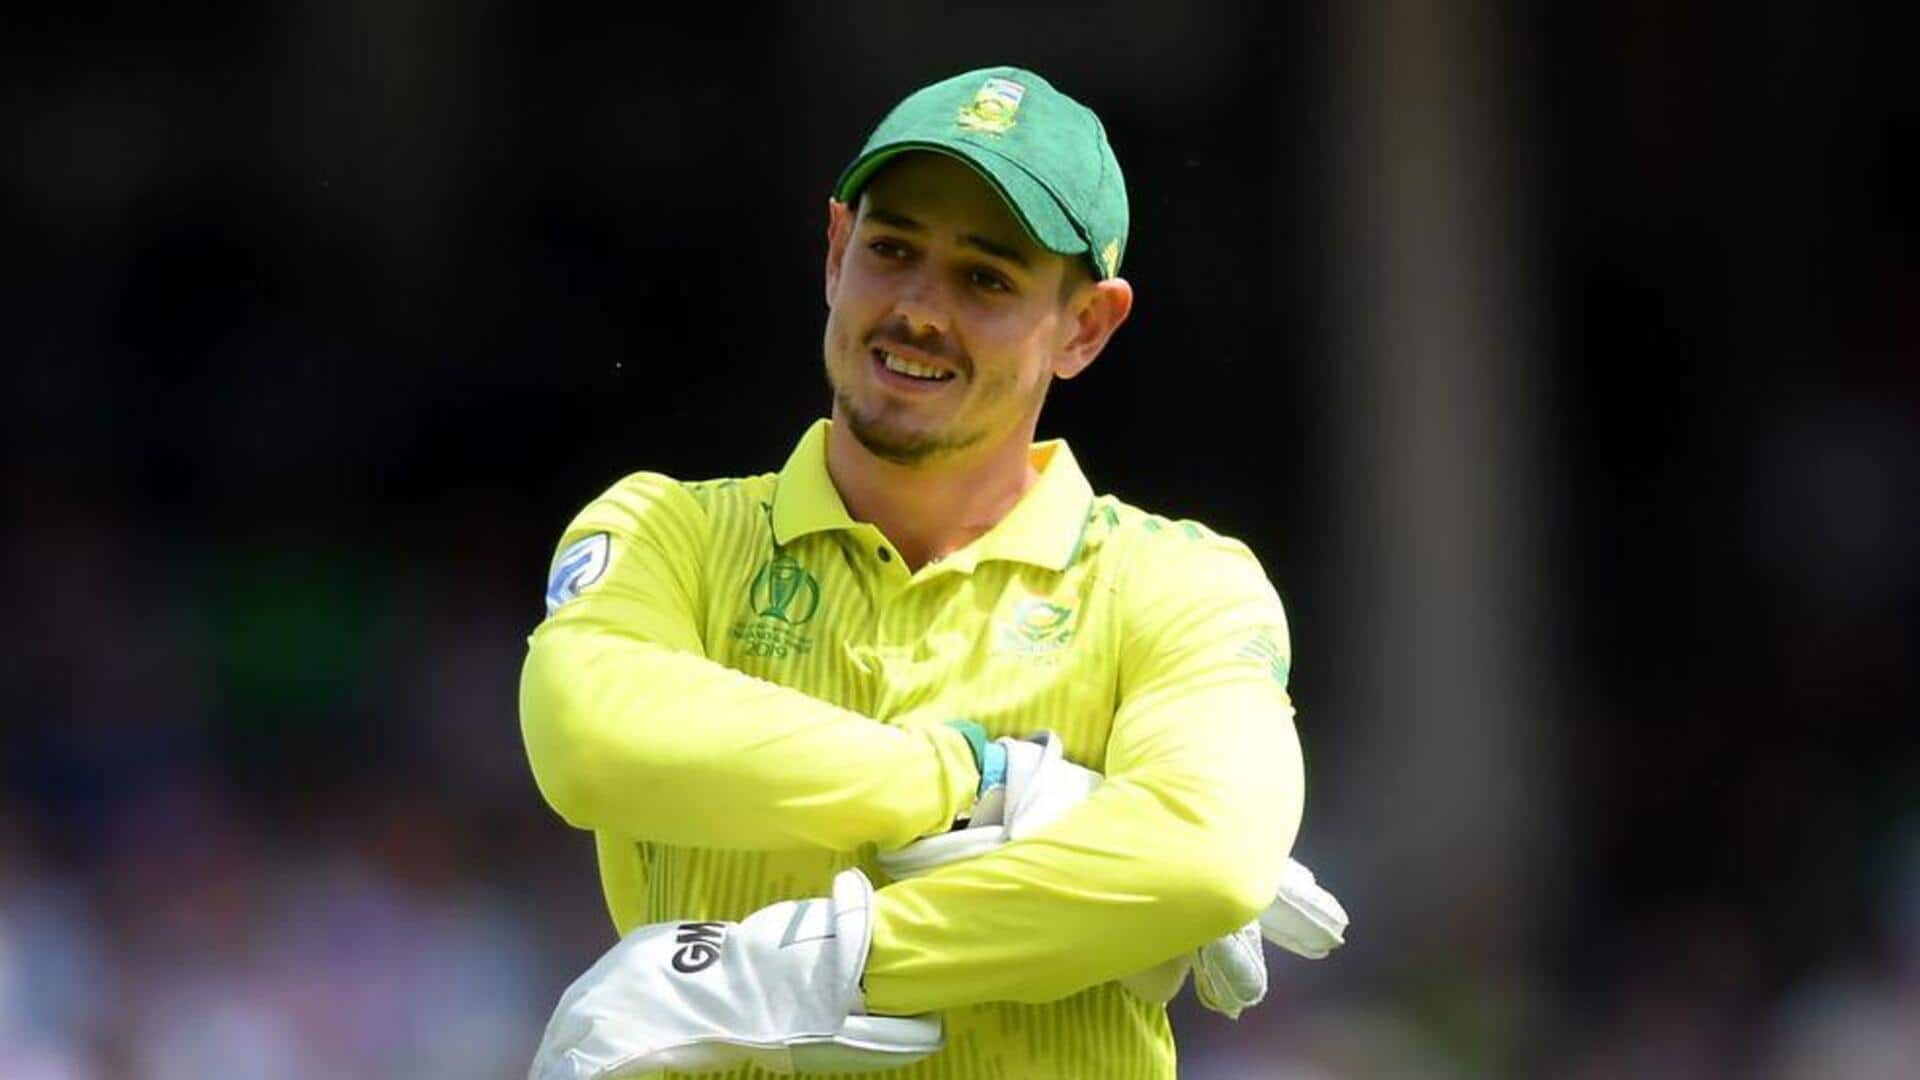 Quinton de Kock accomplishes this wicket-keeping feat for South Africa